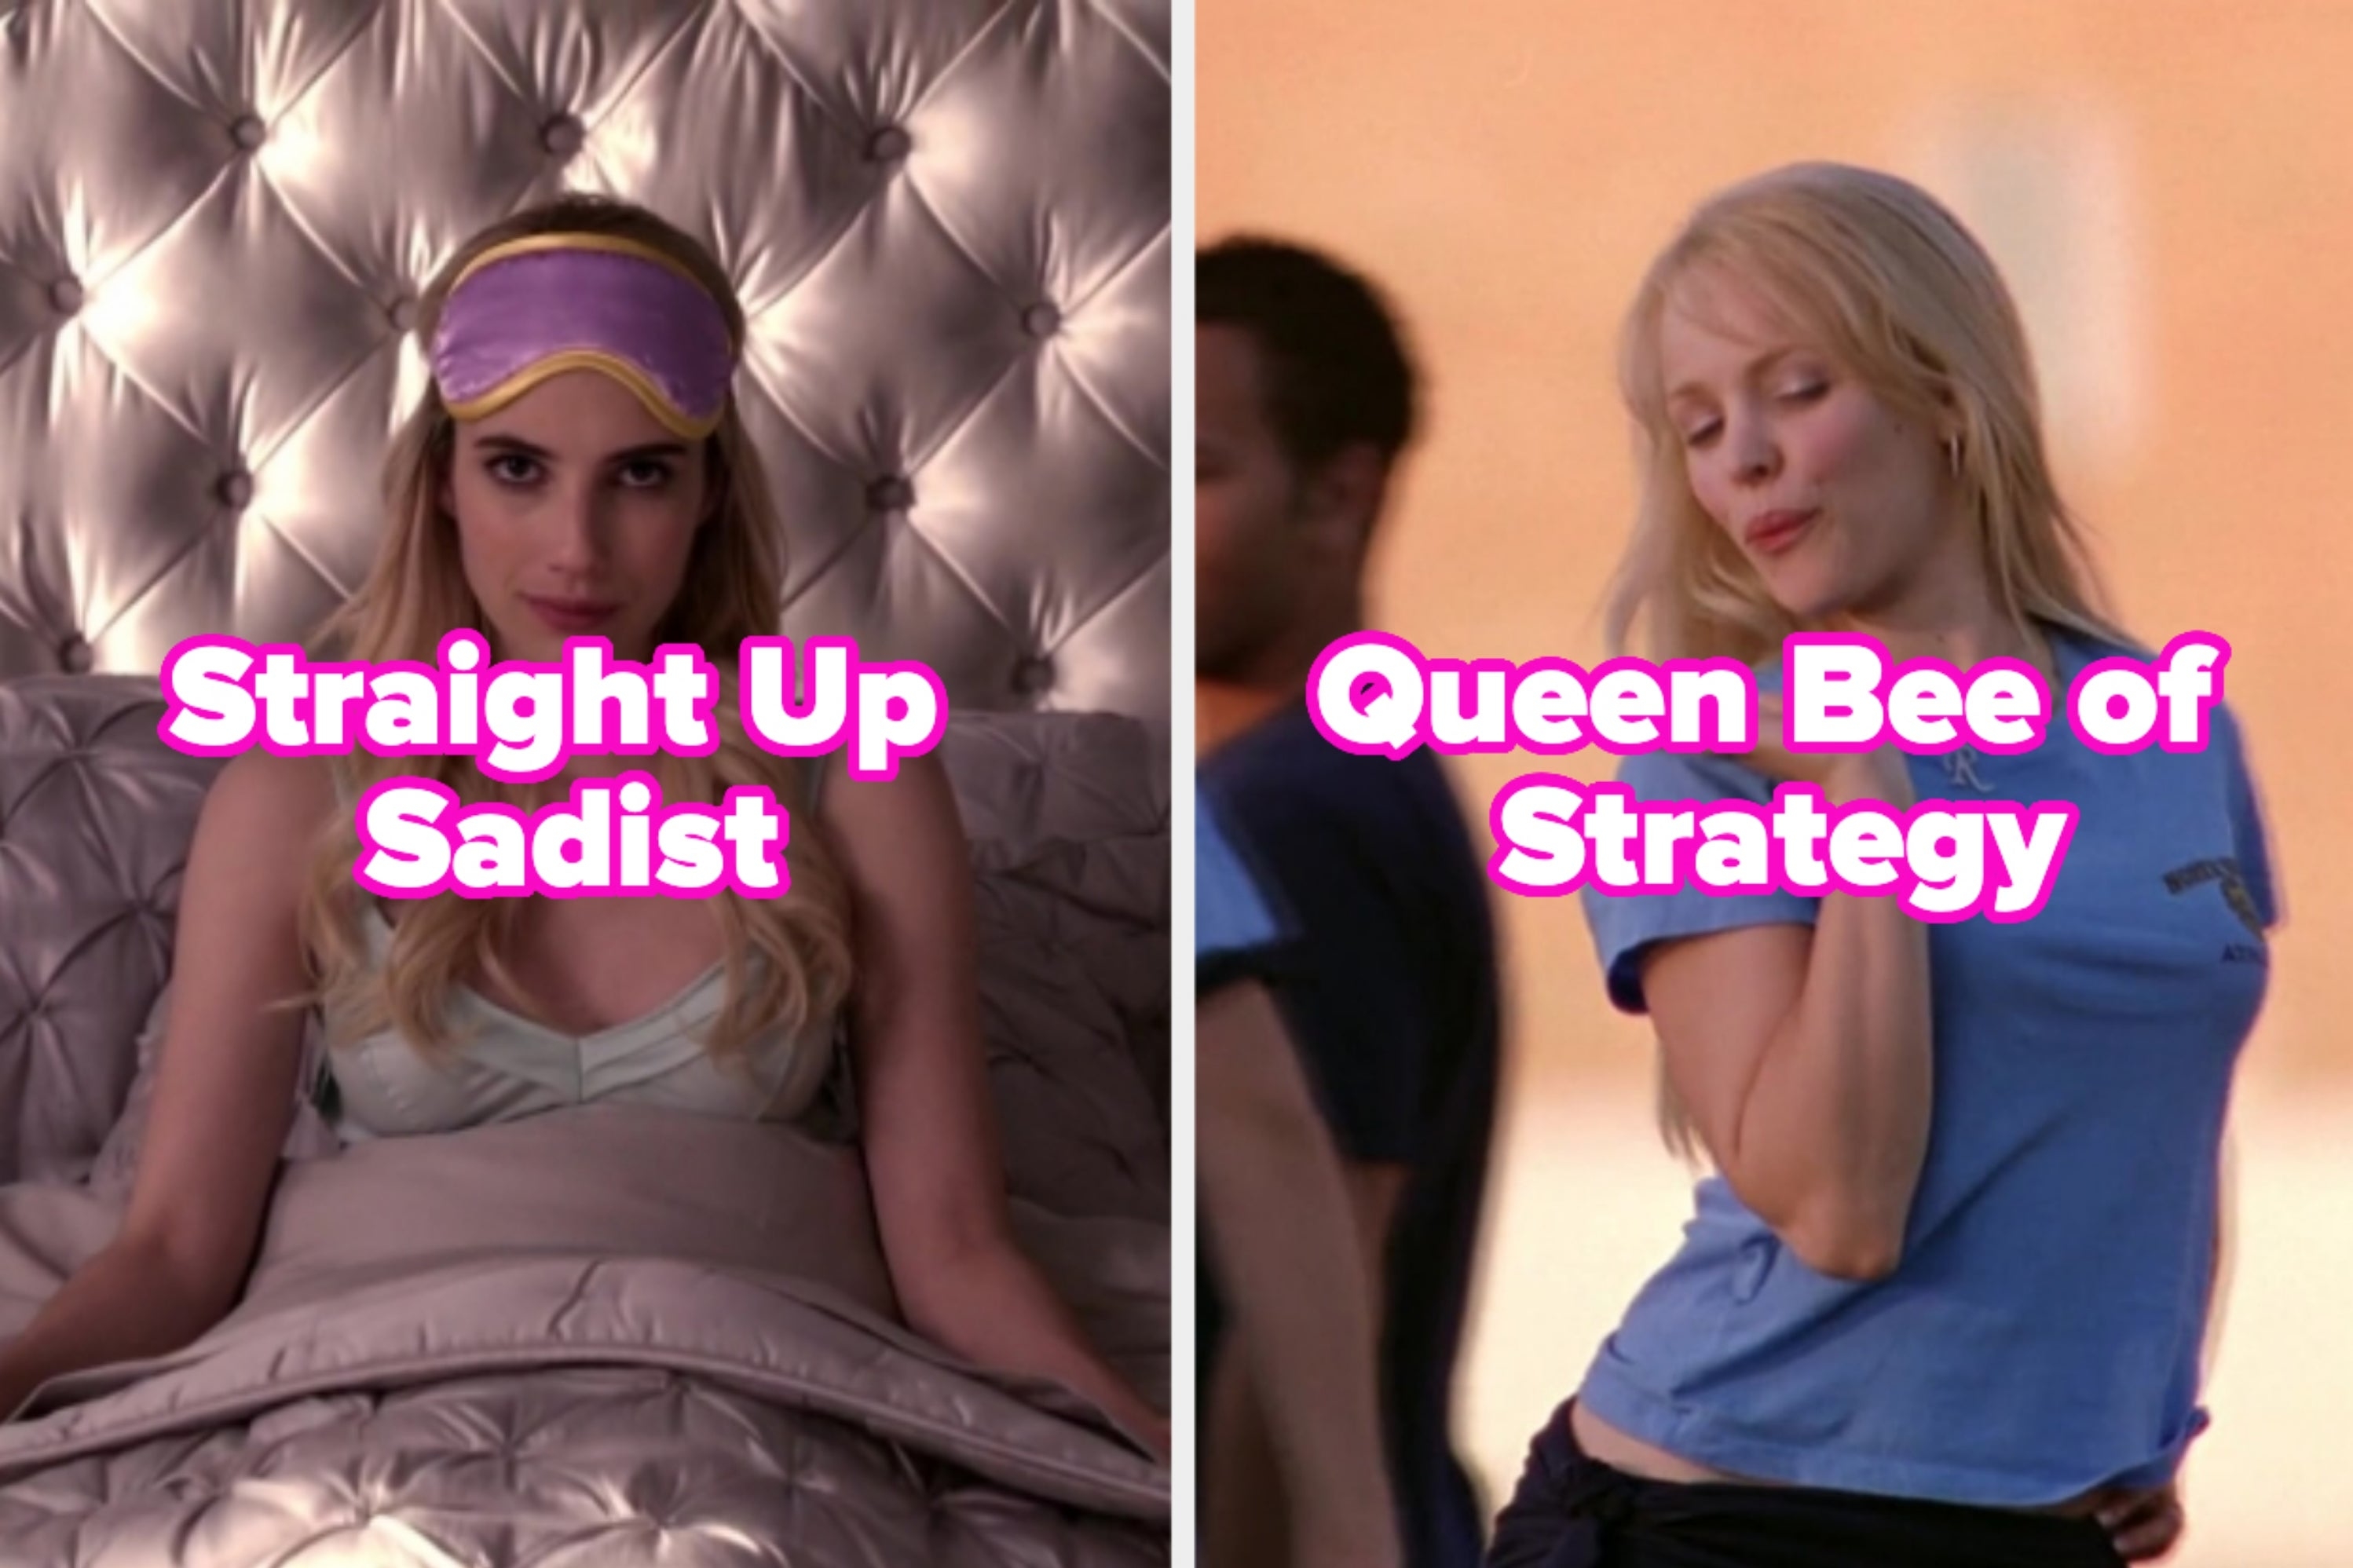 On the left, Emma Roberts sitting up in bed and smirking as Chanel in Scream Queens labeled Straight Up Sadist, and on the right, Regina George from Mean Girls blowing a kiss labeled Queen Bee of Strategy